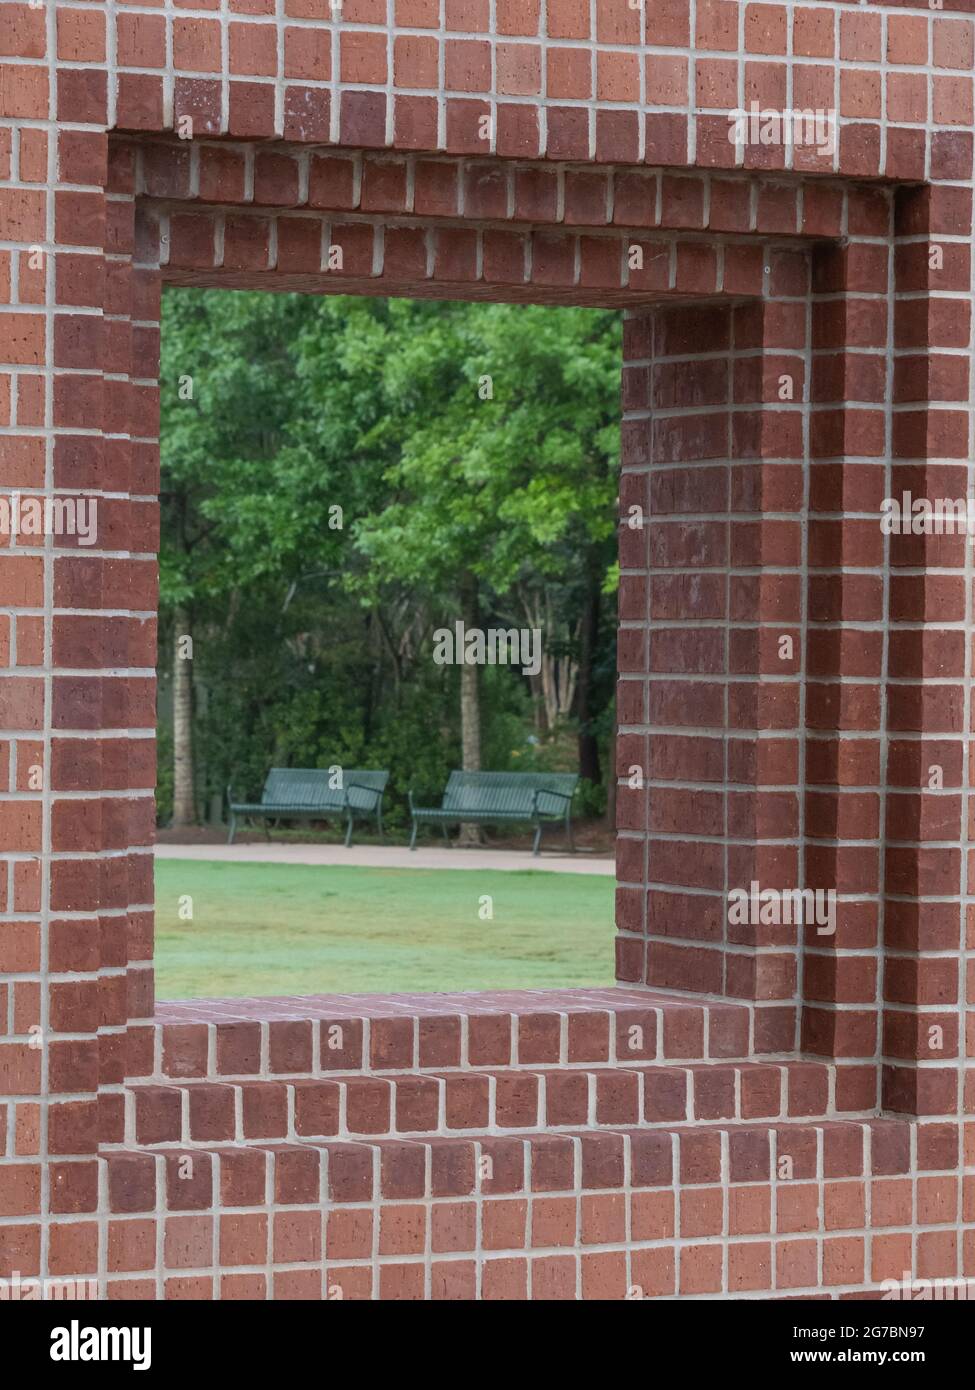 Town Green Park in The Woodlands, Texas, seen through a red brick window opening. Stock Photo